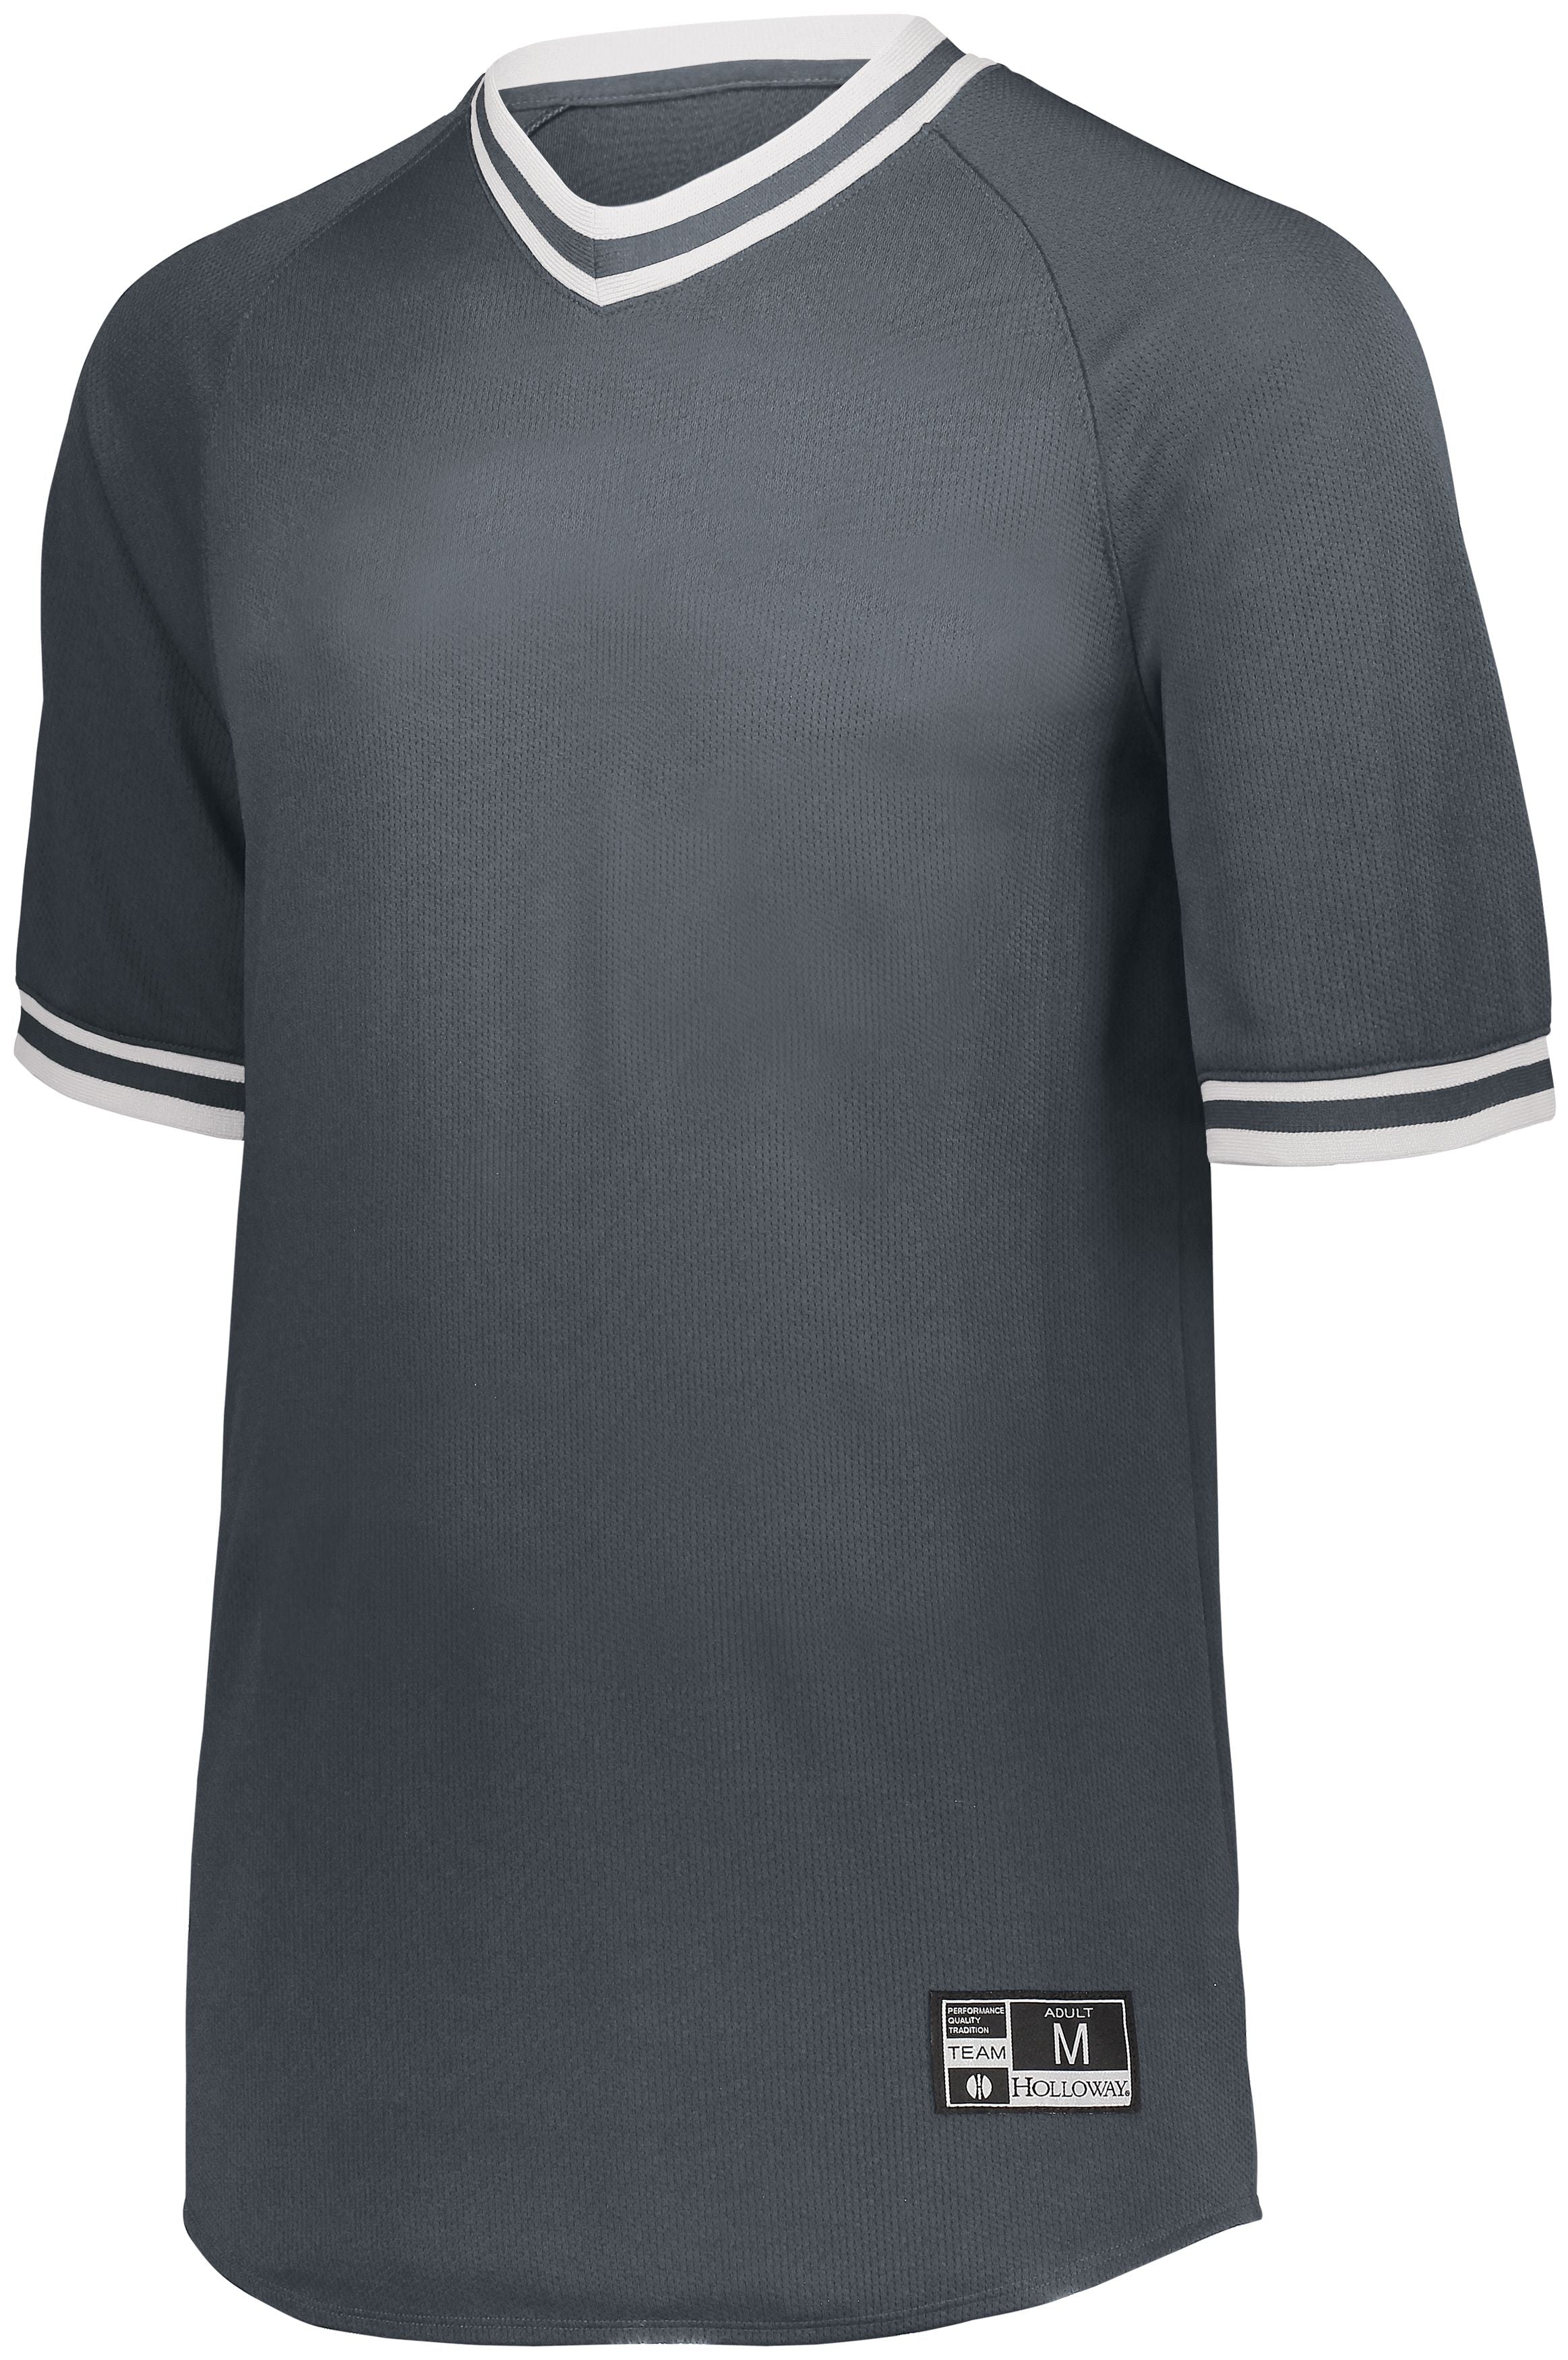 Holloway Retro V-Neck Baseball Jersey in Graphite/White  -Part of the Adult, Adult-Jersey, Baseball, Holloway, Shirts, All-Sports, All-Sports-1 product lines at KanaleyCreations.com